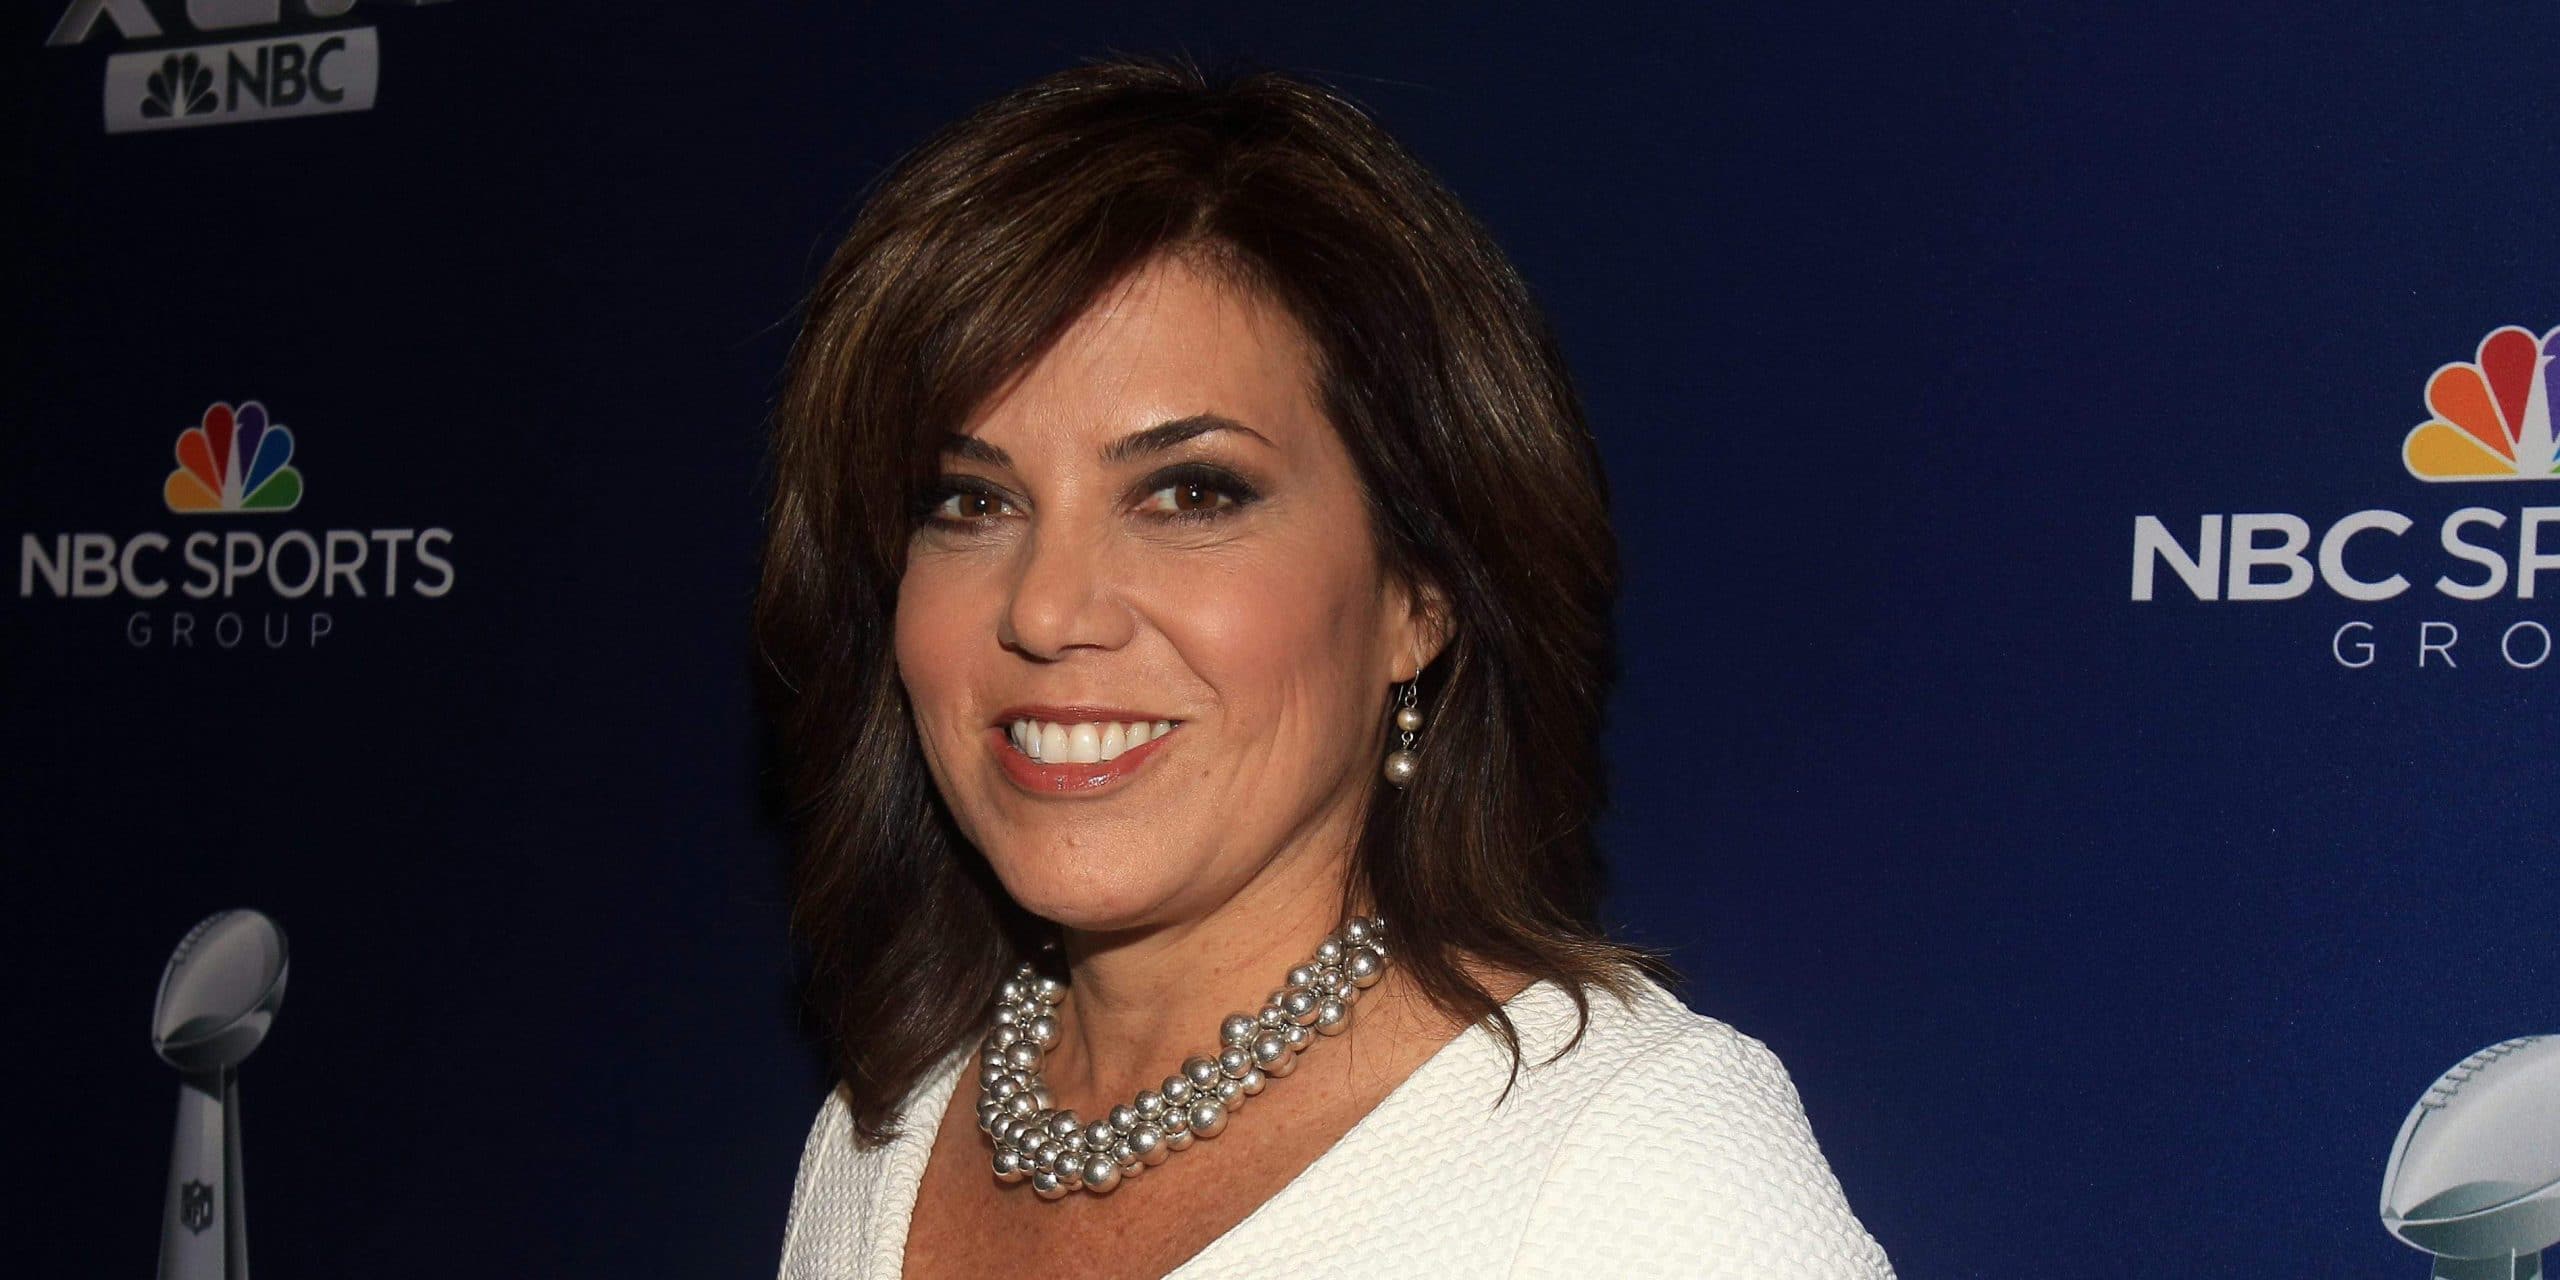 Contents1 Who is Michele Tafoya